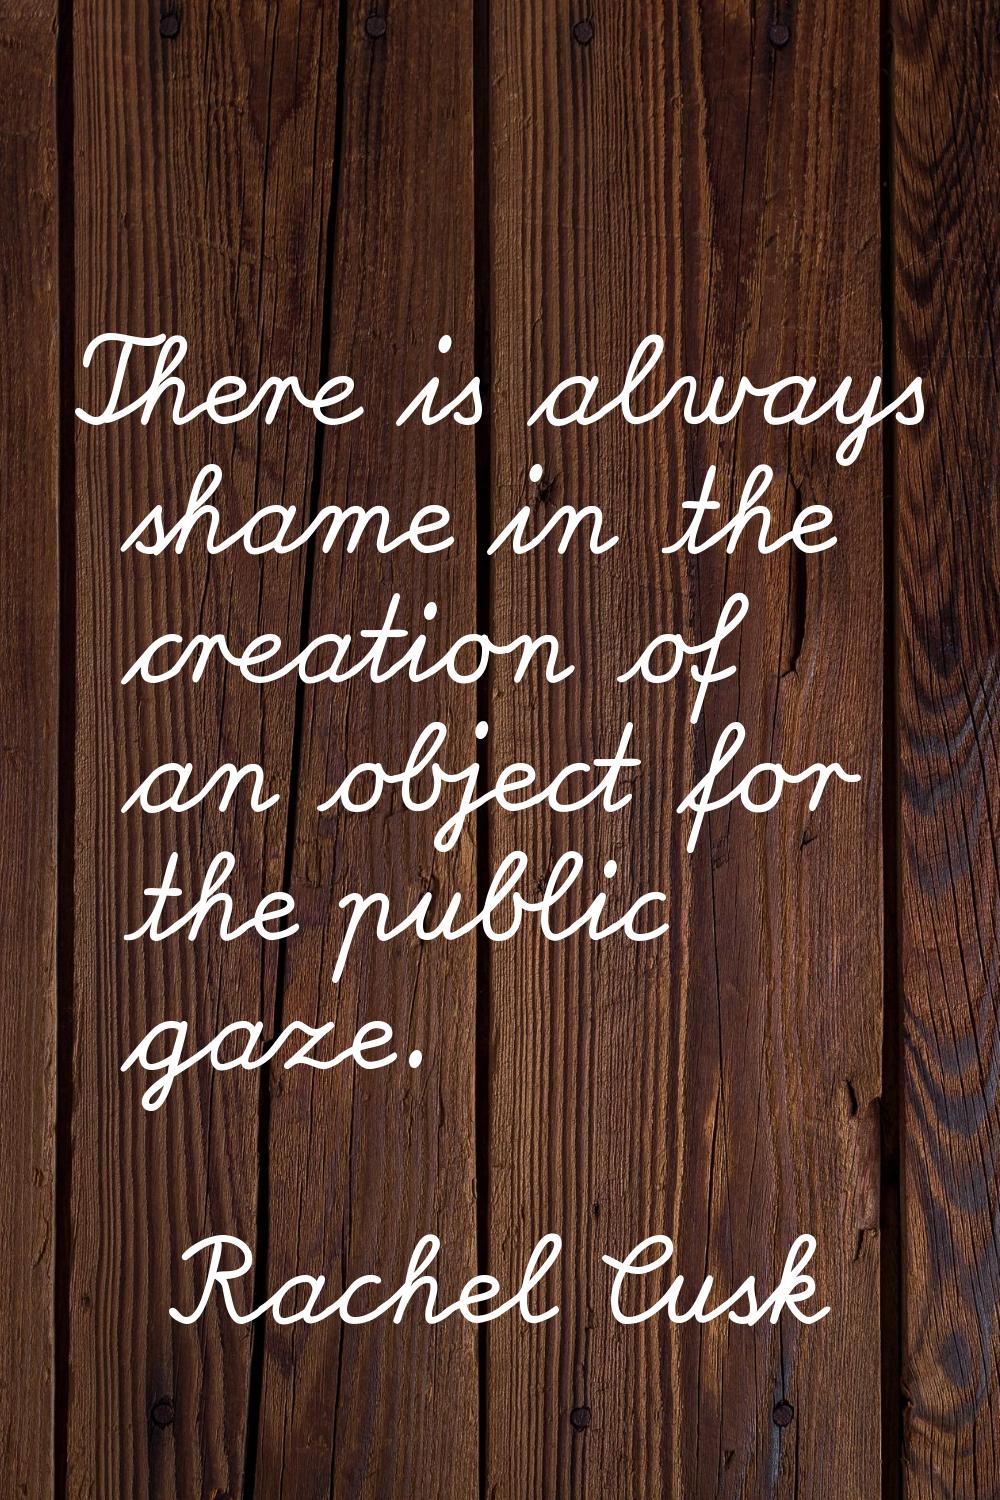 There is always shame in the creation of an object for the public gaze.